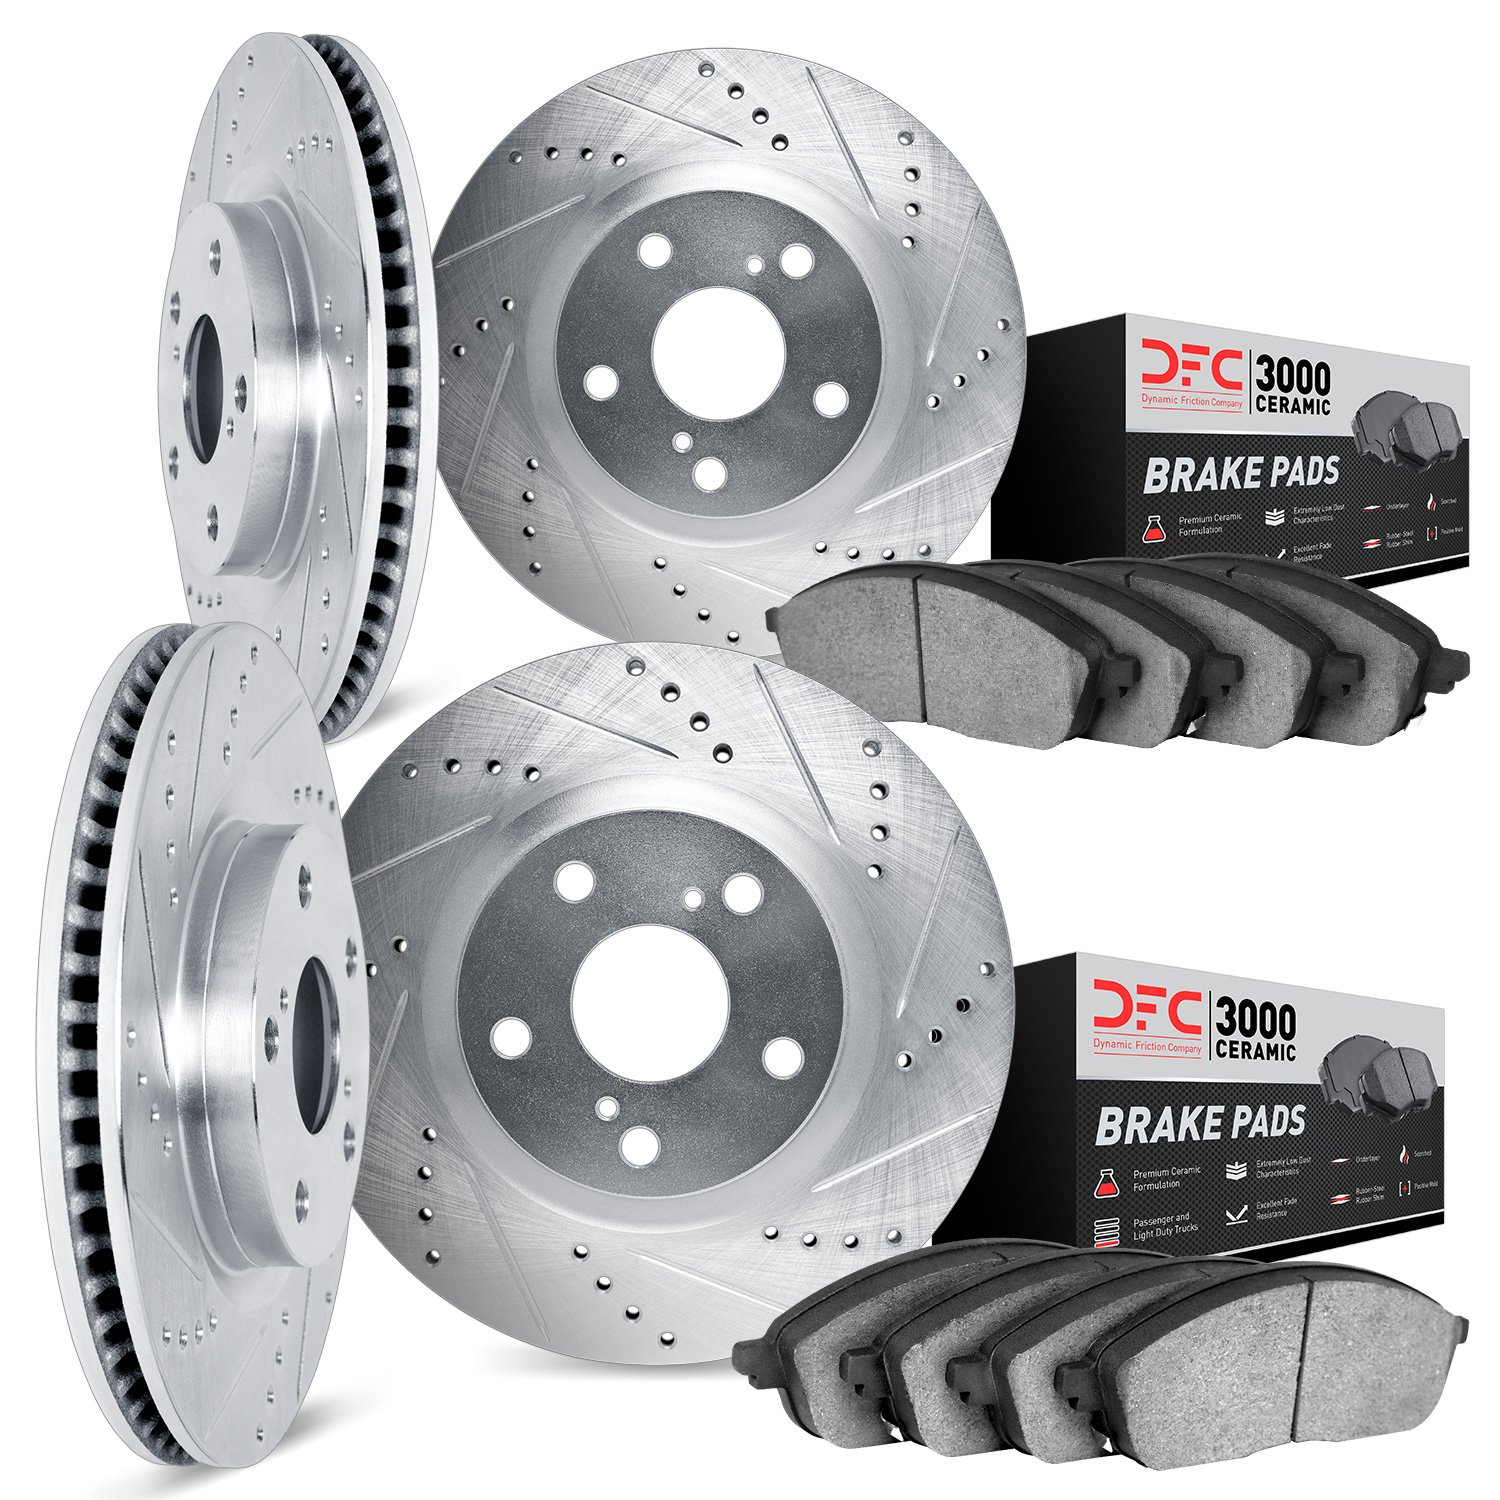 7304-80014 Drilled/Slotted Brake Rotor with 3000-Series Ceramic Brake Pads Kit [Silver], 1992-1995 Ford/Lincoln/Mercury/Mazda, P